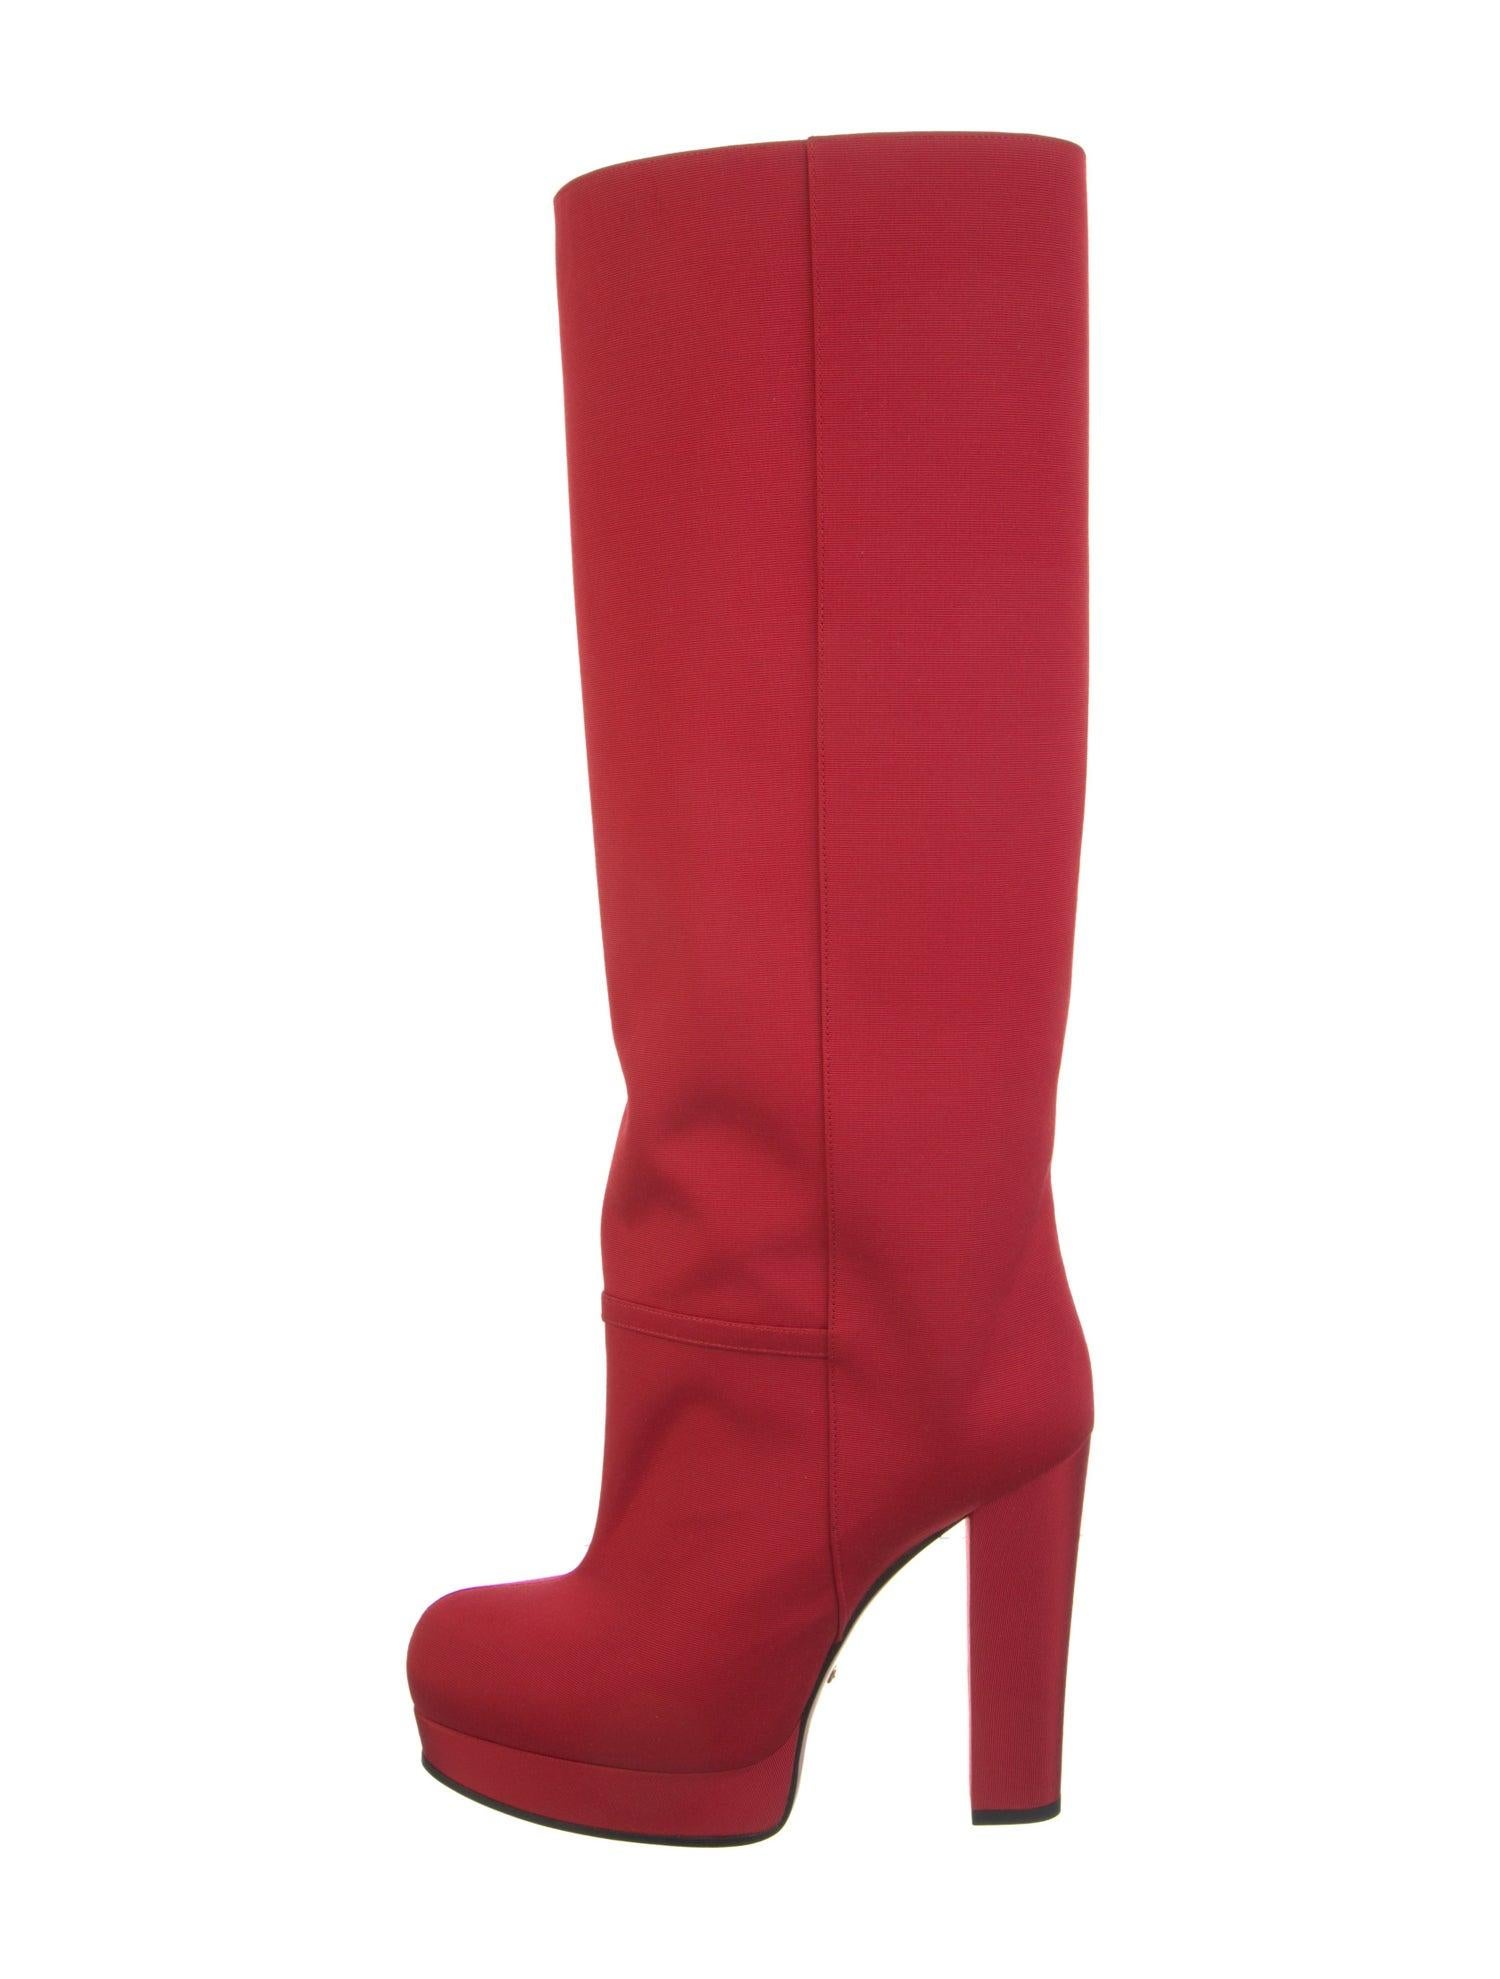 New With Box Gucci Fall 2019 Alessandro Michele Red Boots Sz 38 en vente 5